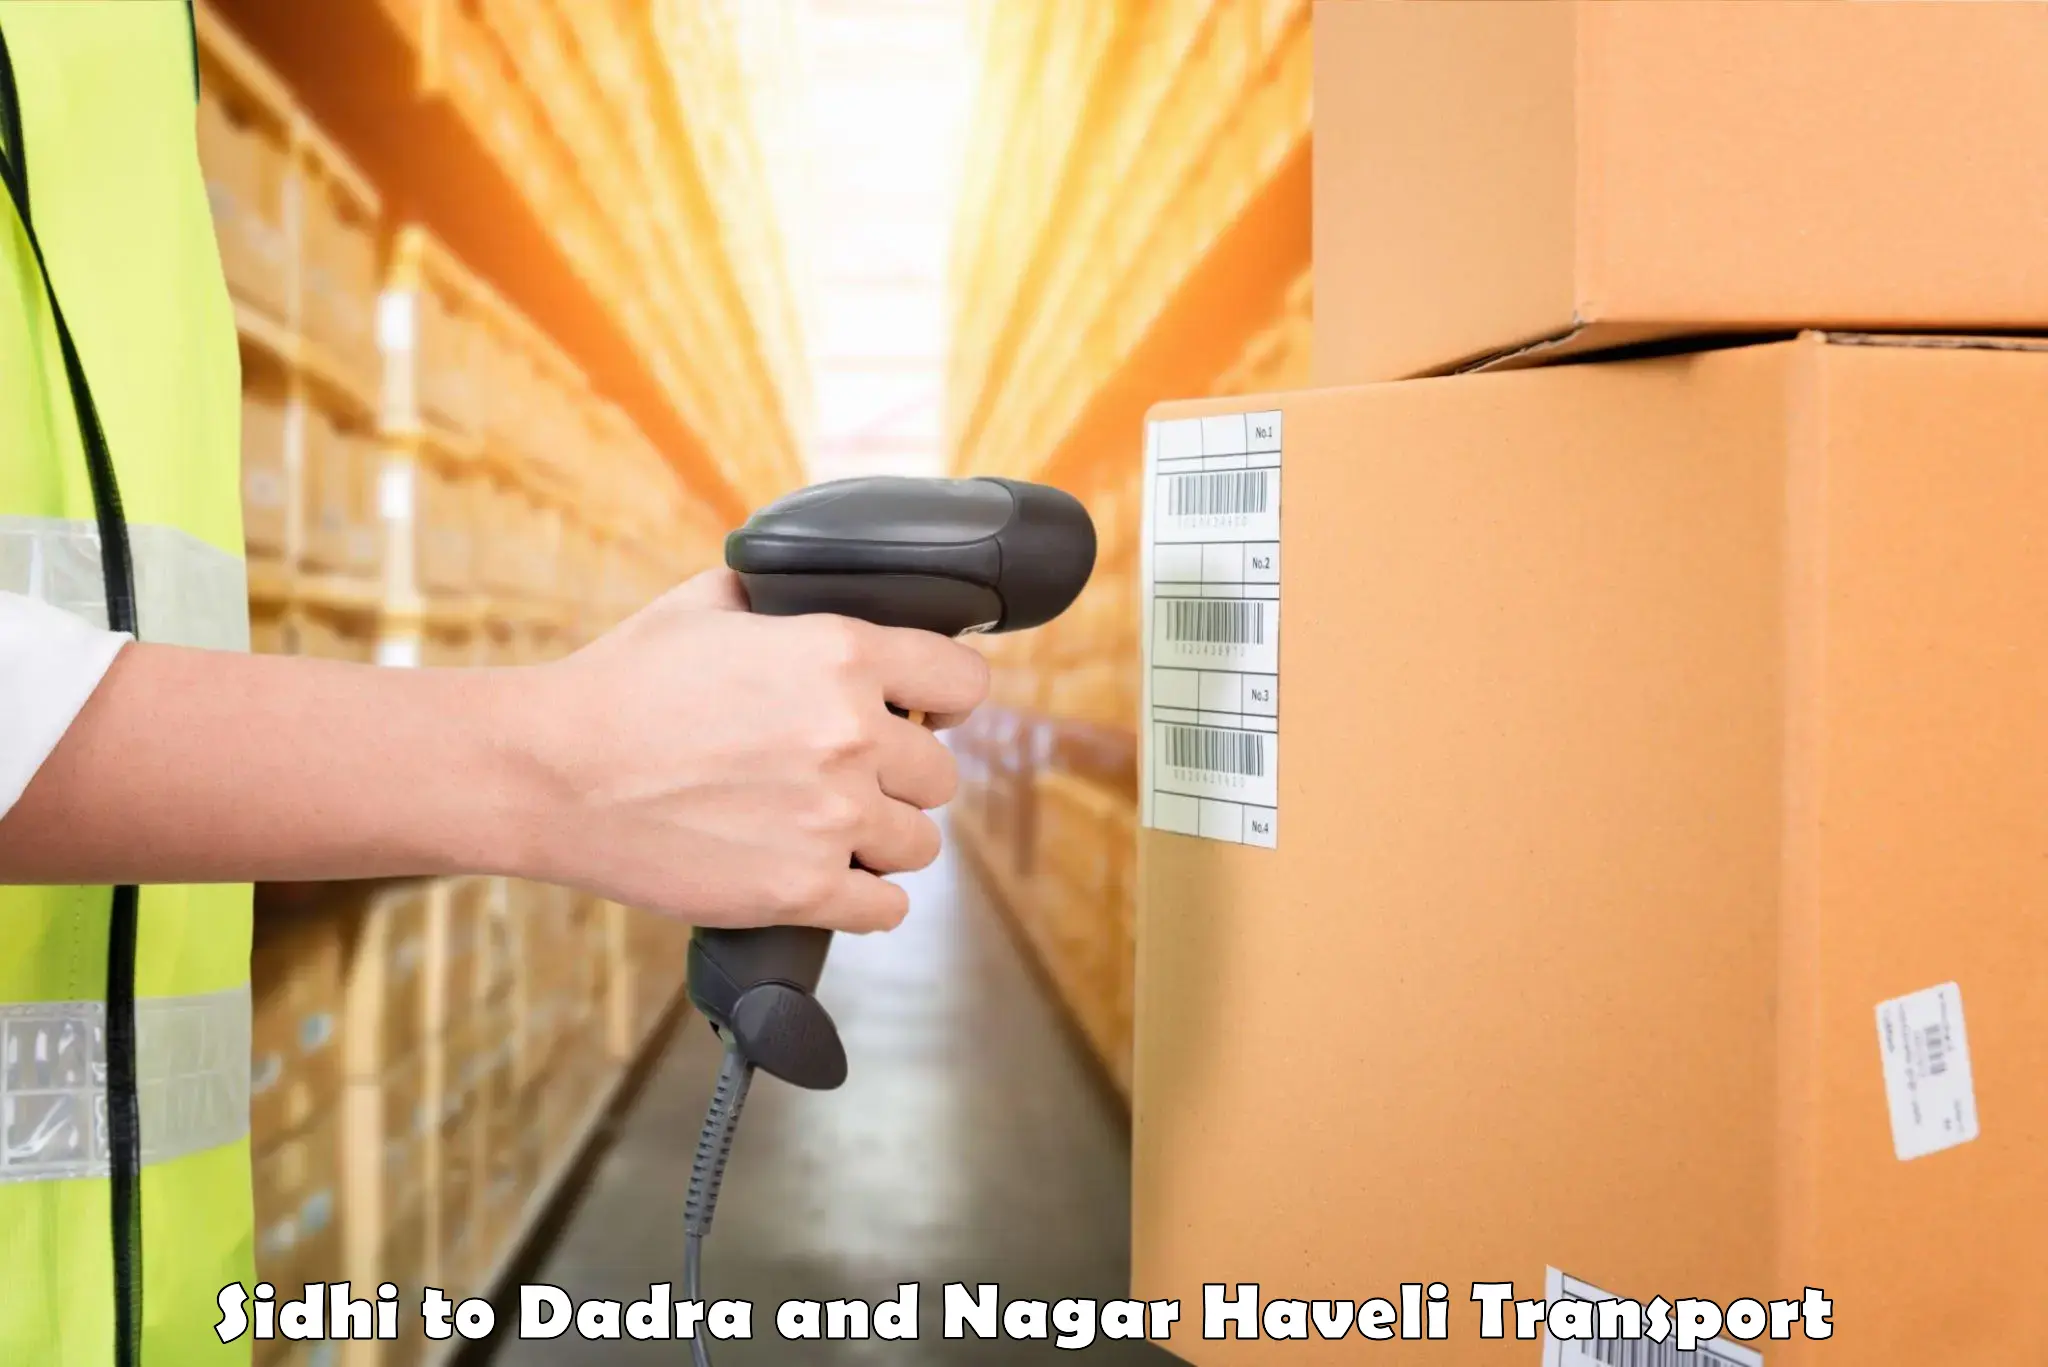 Container transport service Sidhi to Dadra and Nagar Haveli